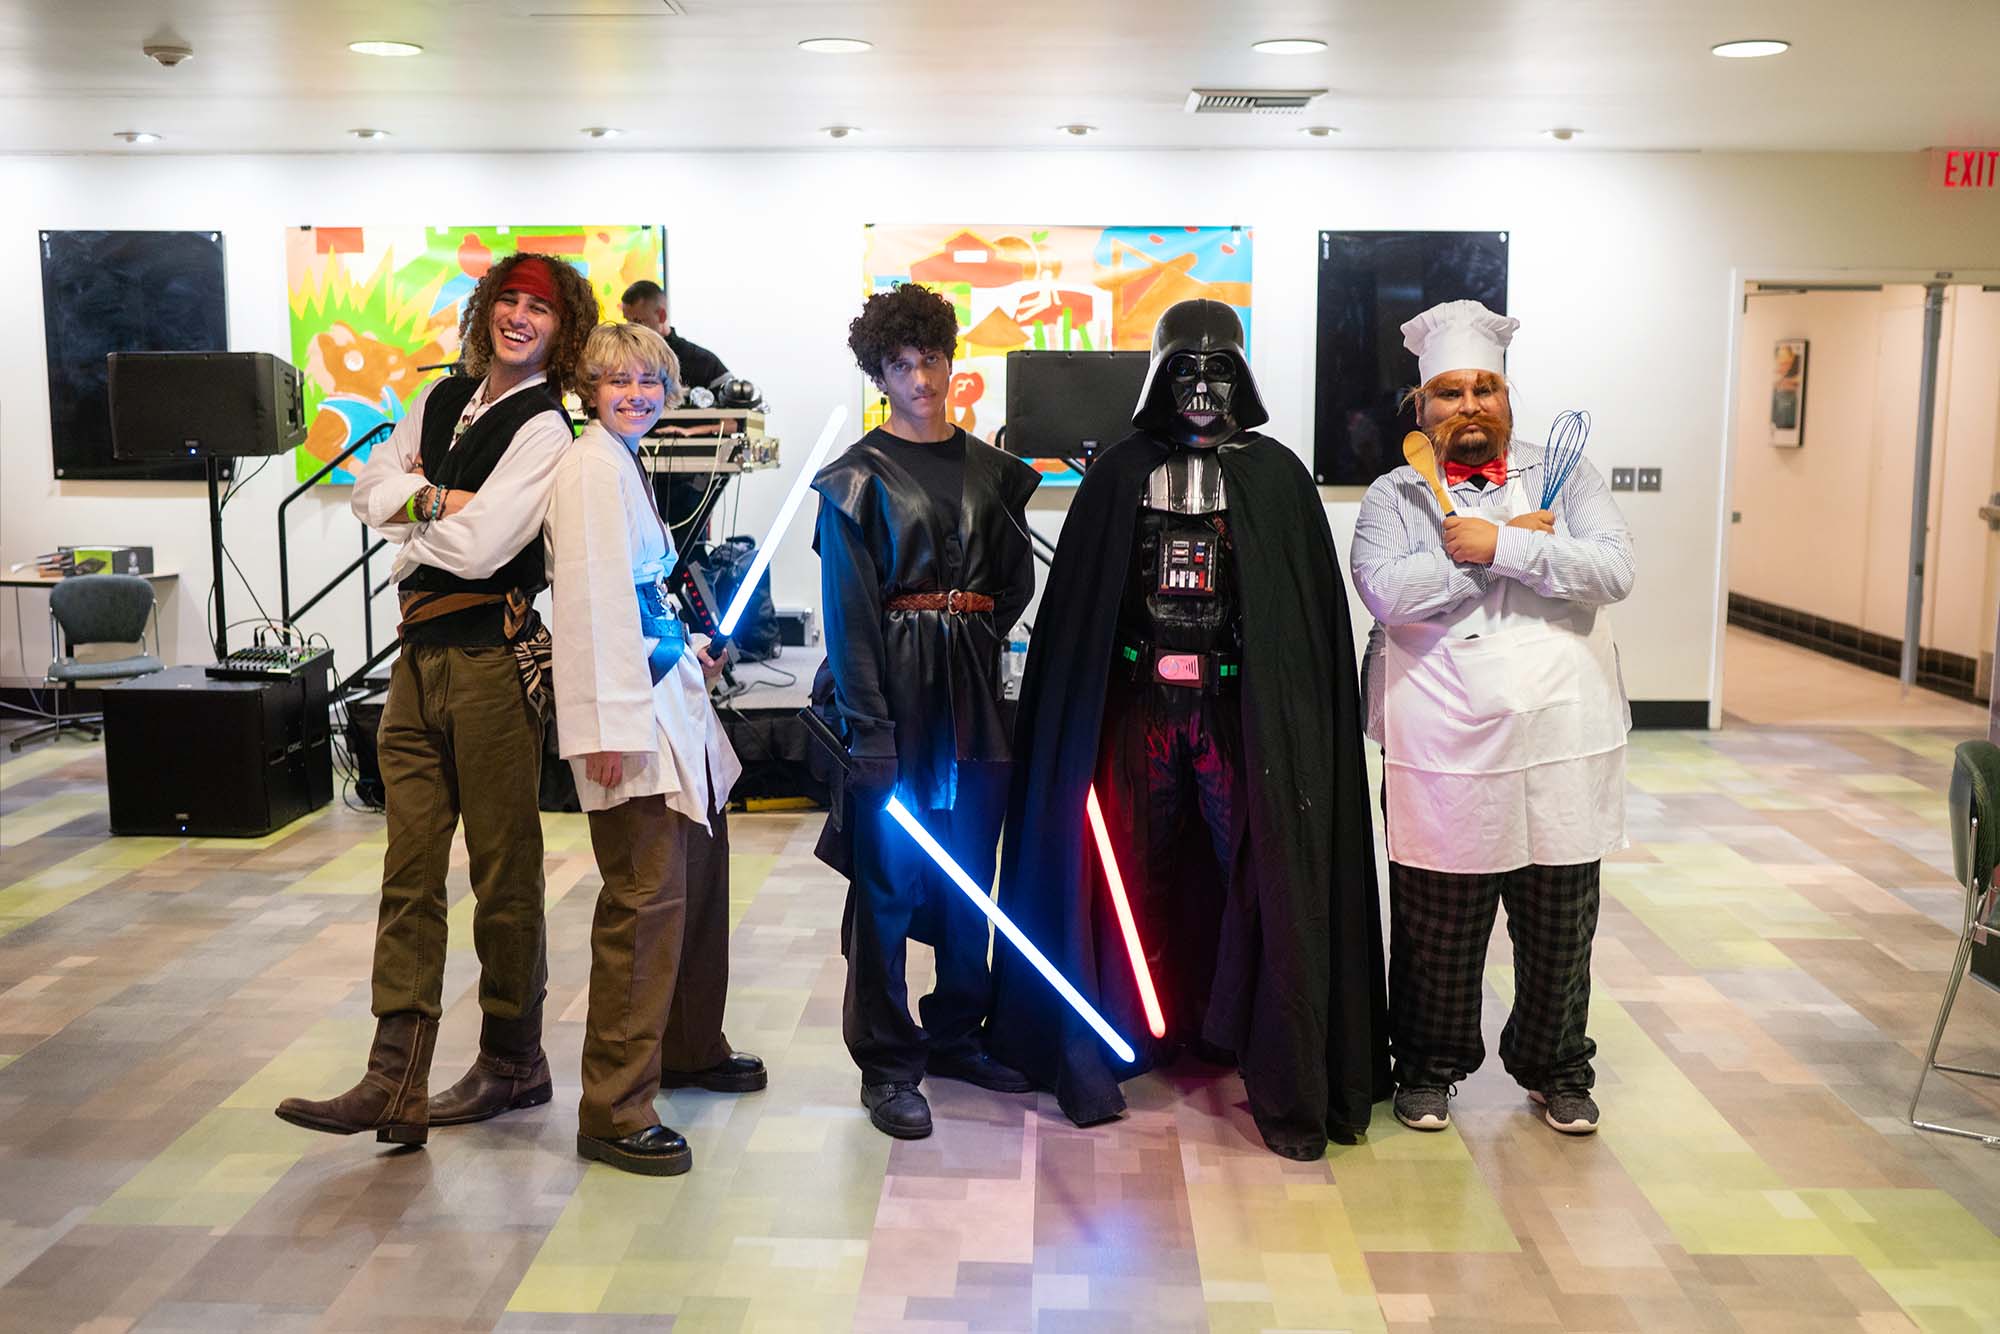  A group of people in various costumes are standing indoors, with two holding lightsabers, one dressed as a chef, and one in a dark cape and mask. There's a music setup in the background.